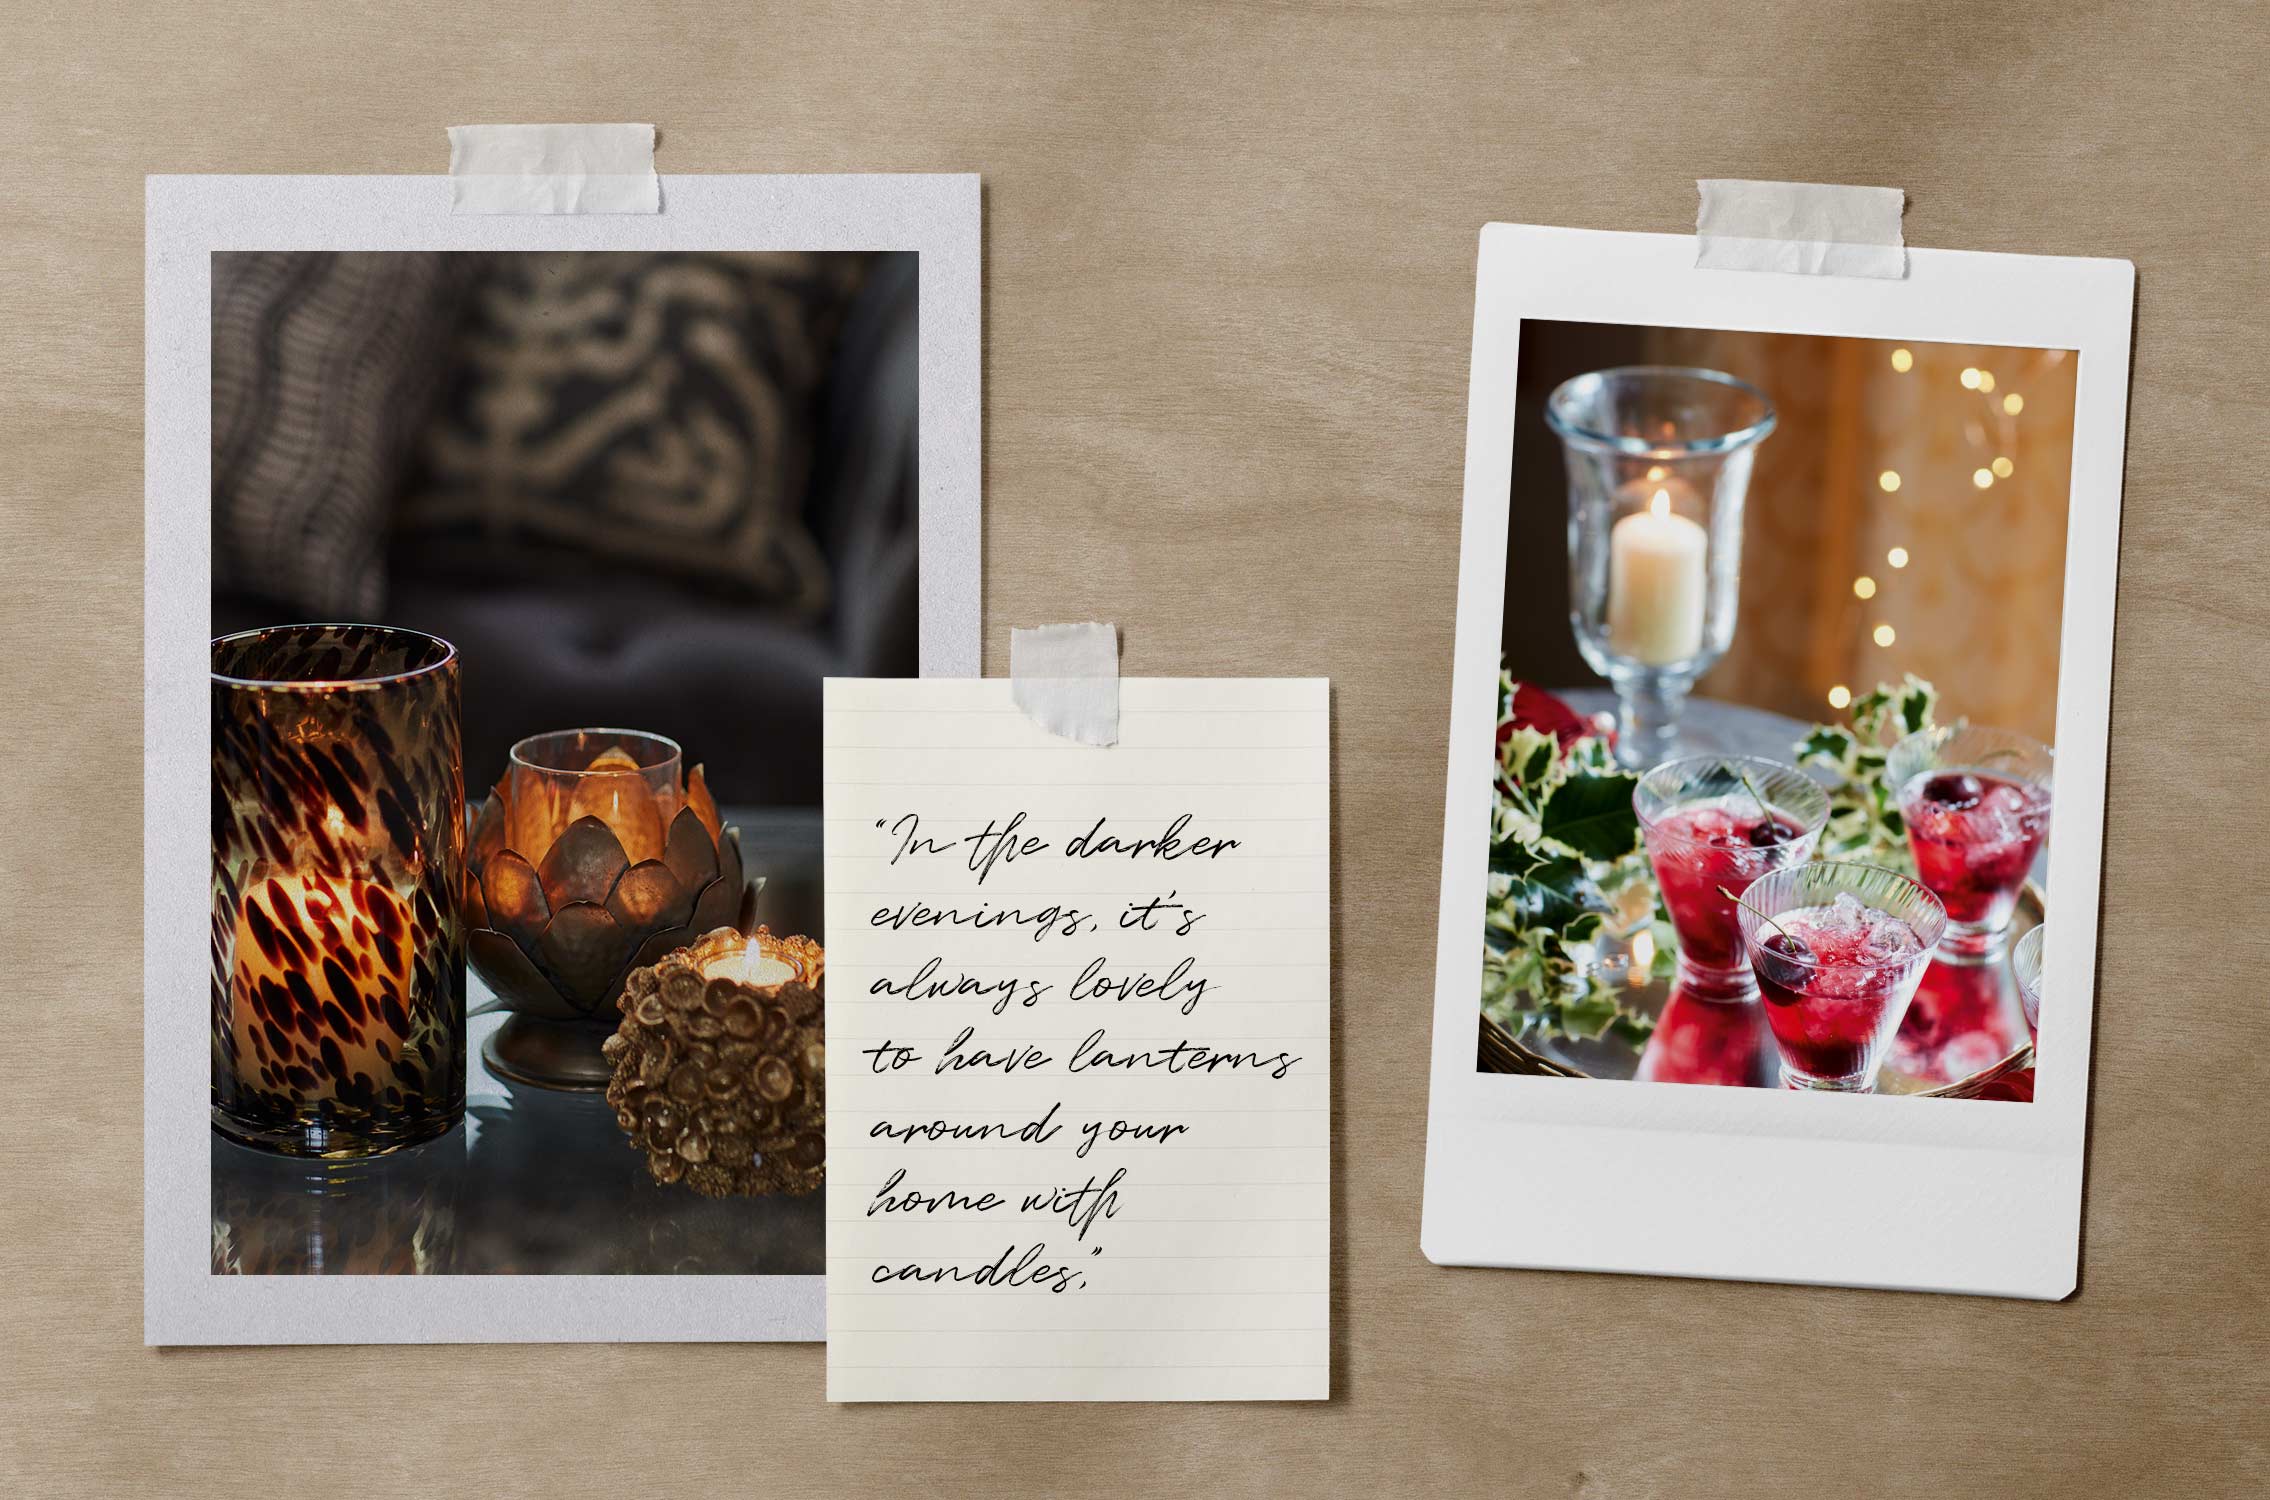 A pinboard of candle imagery, with gold nature-inspired candles and red cocktails lit by a glass candle lamp